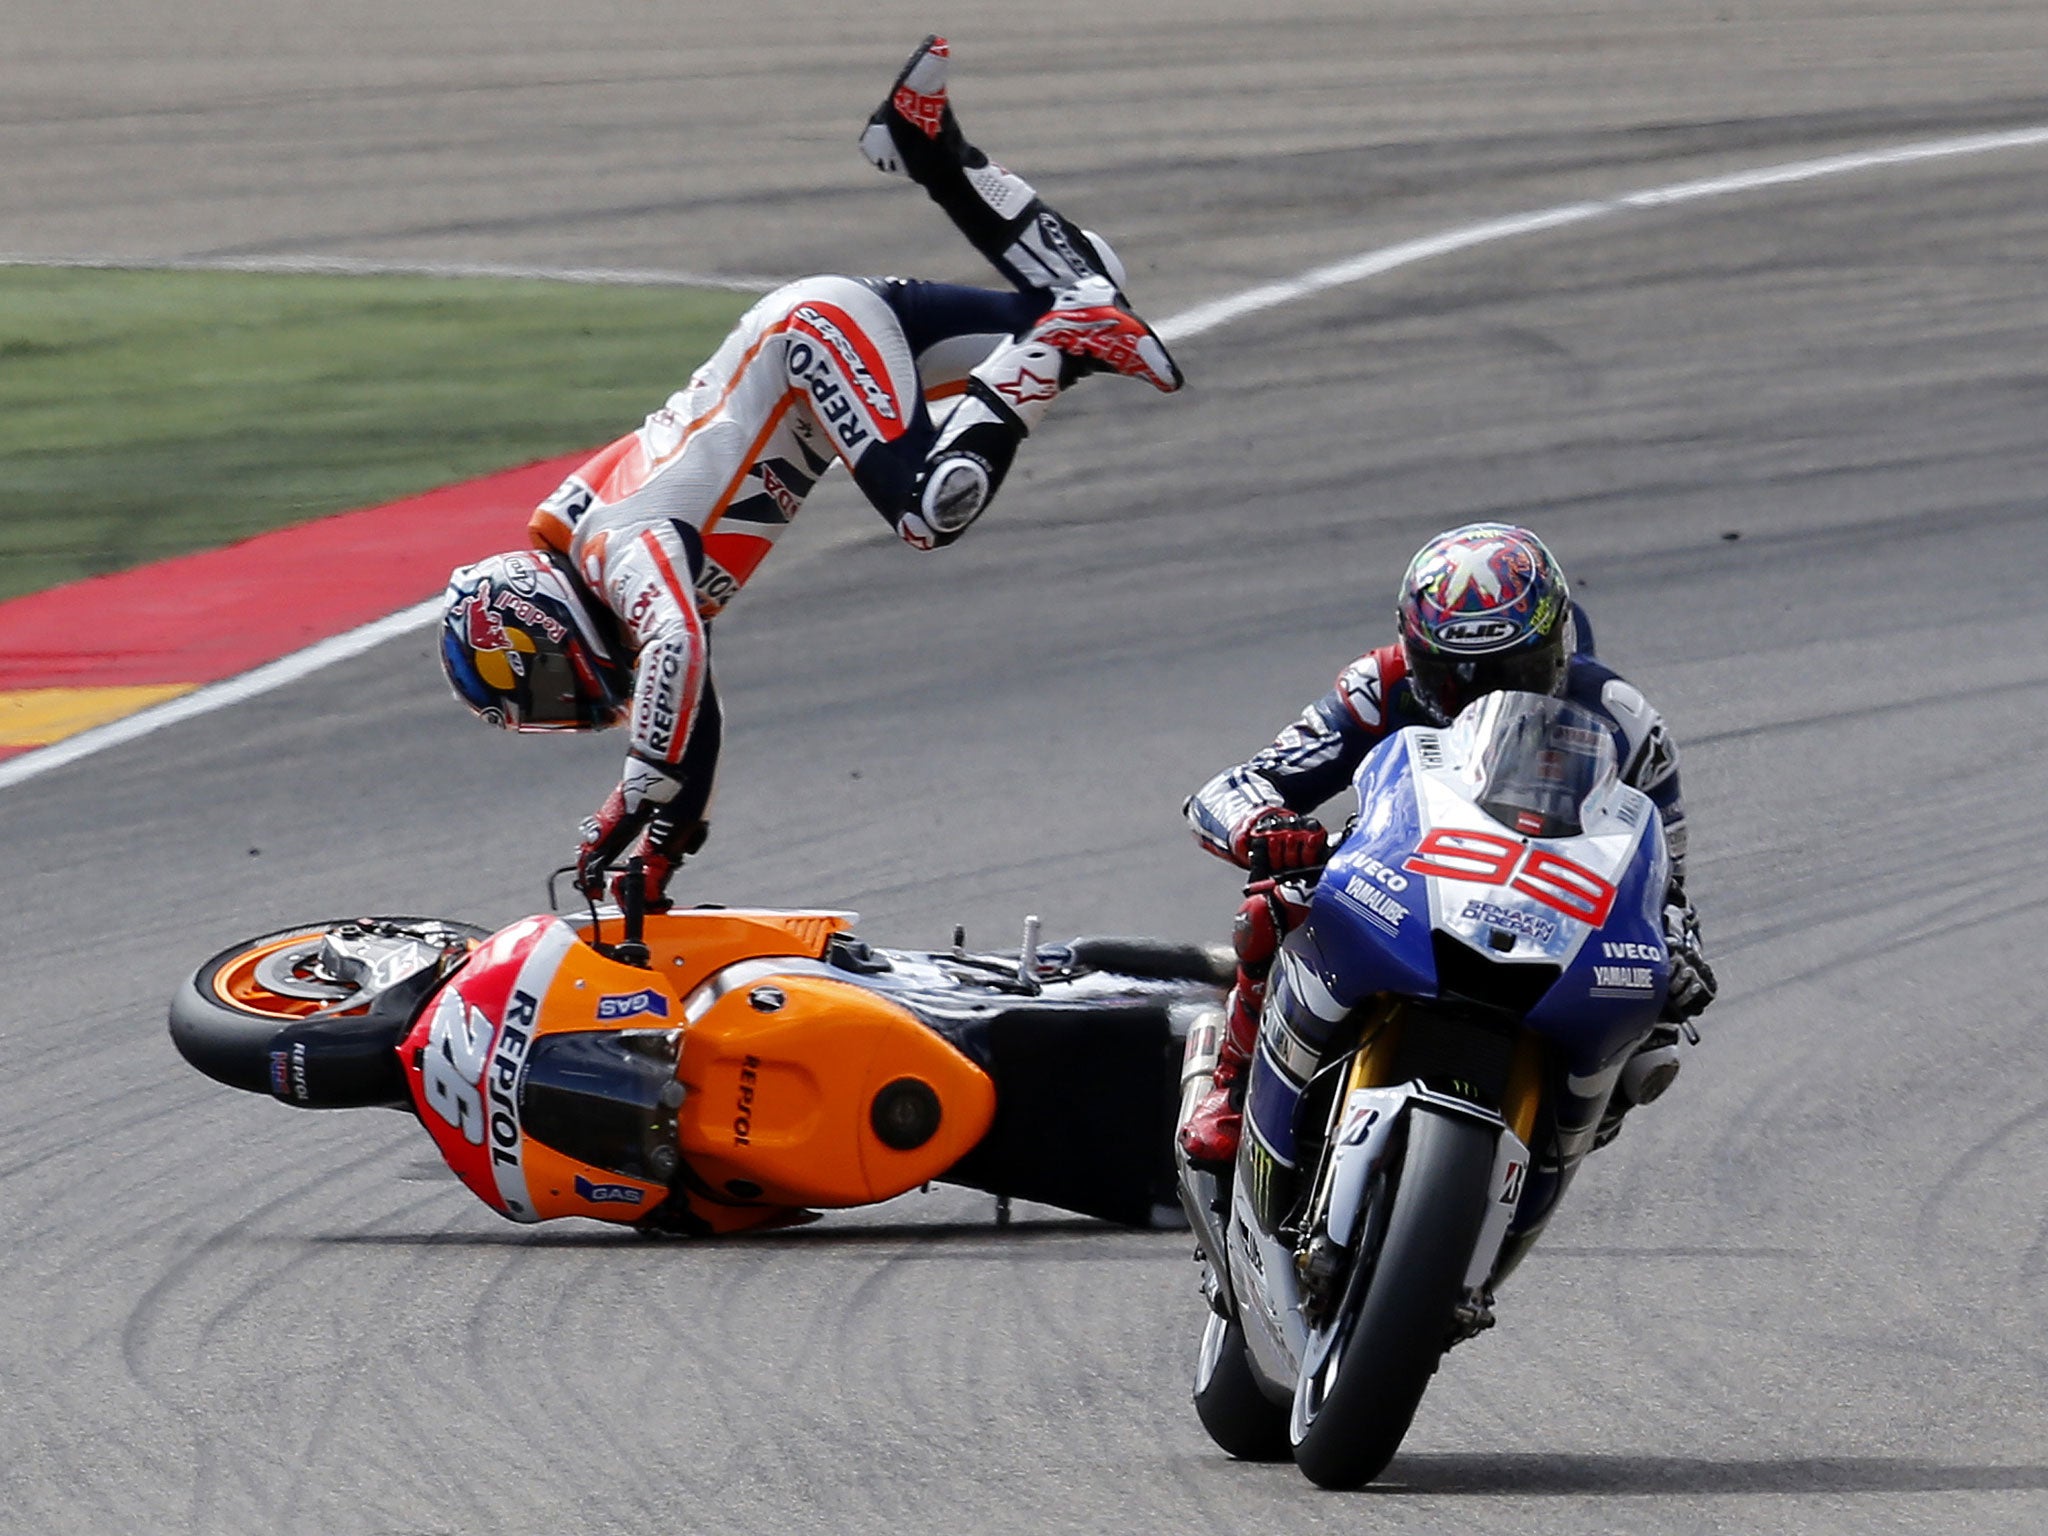 Marc Marquez extended his MotoGP points lead by winning the Aragon Grand Prix but his win came only after he played a part in the crash of Honda team-mate Dani Pedrosa. Marquez grazed the back of Pedrosa’s bike, causing Pedrosa to lose control and slide d